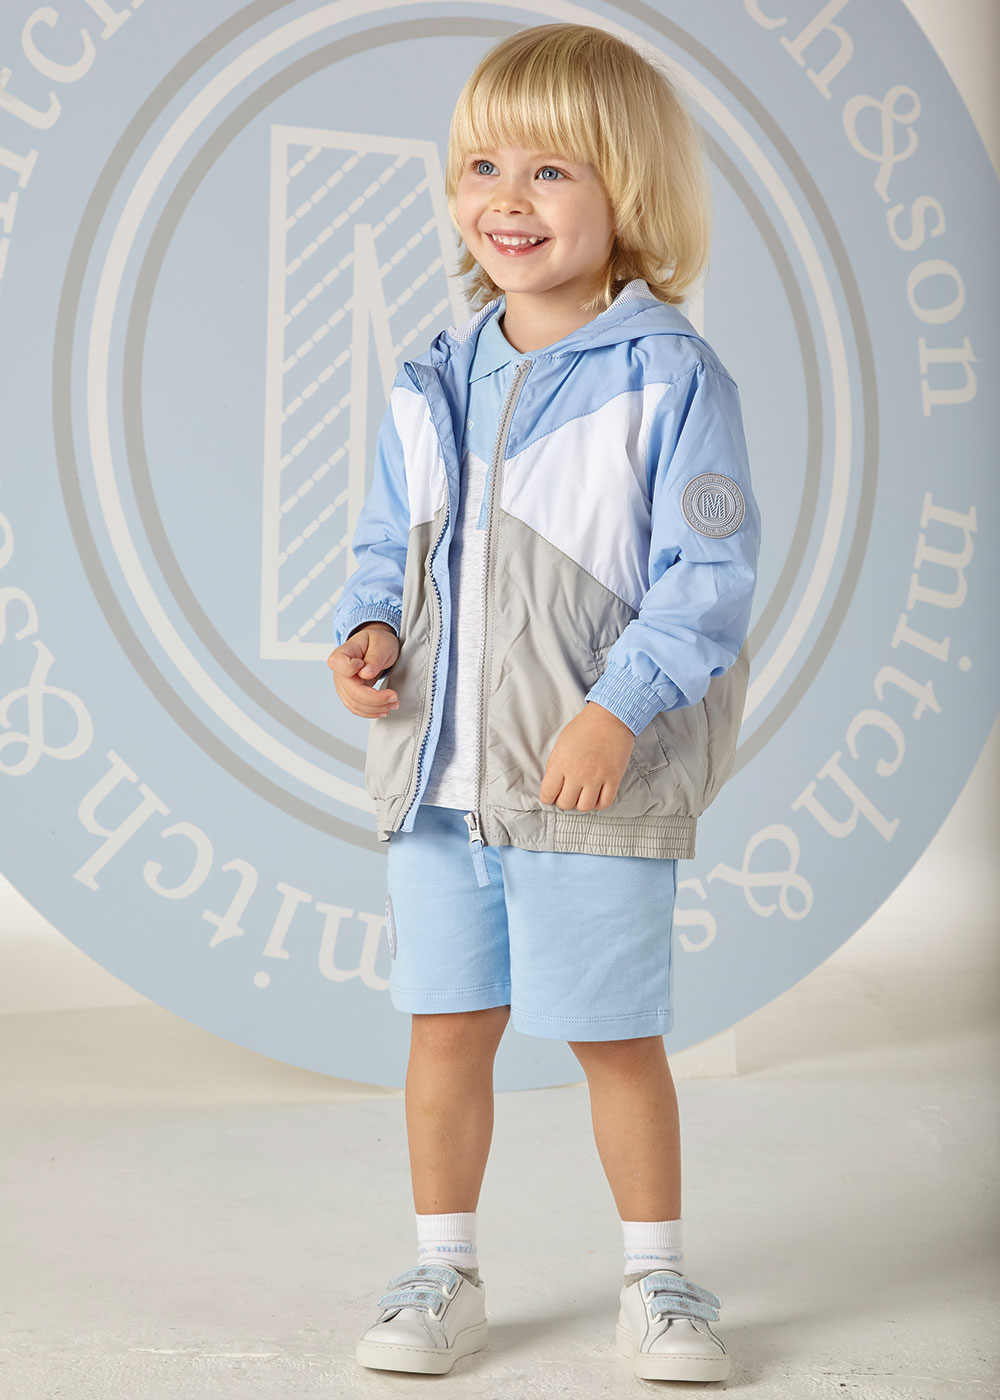 Blonde haired boy in pale blue jacket and shorts